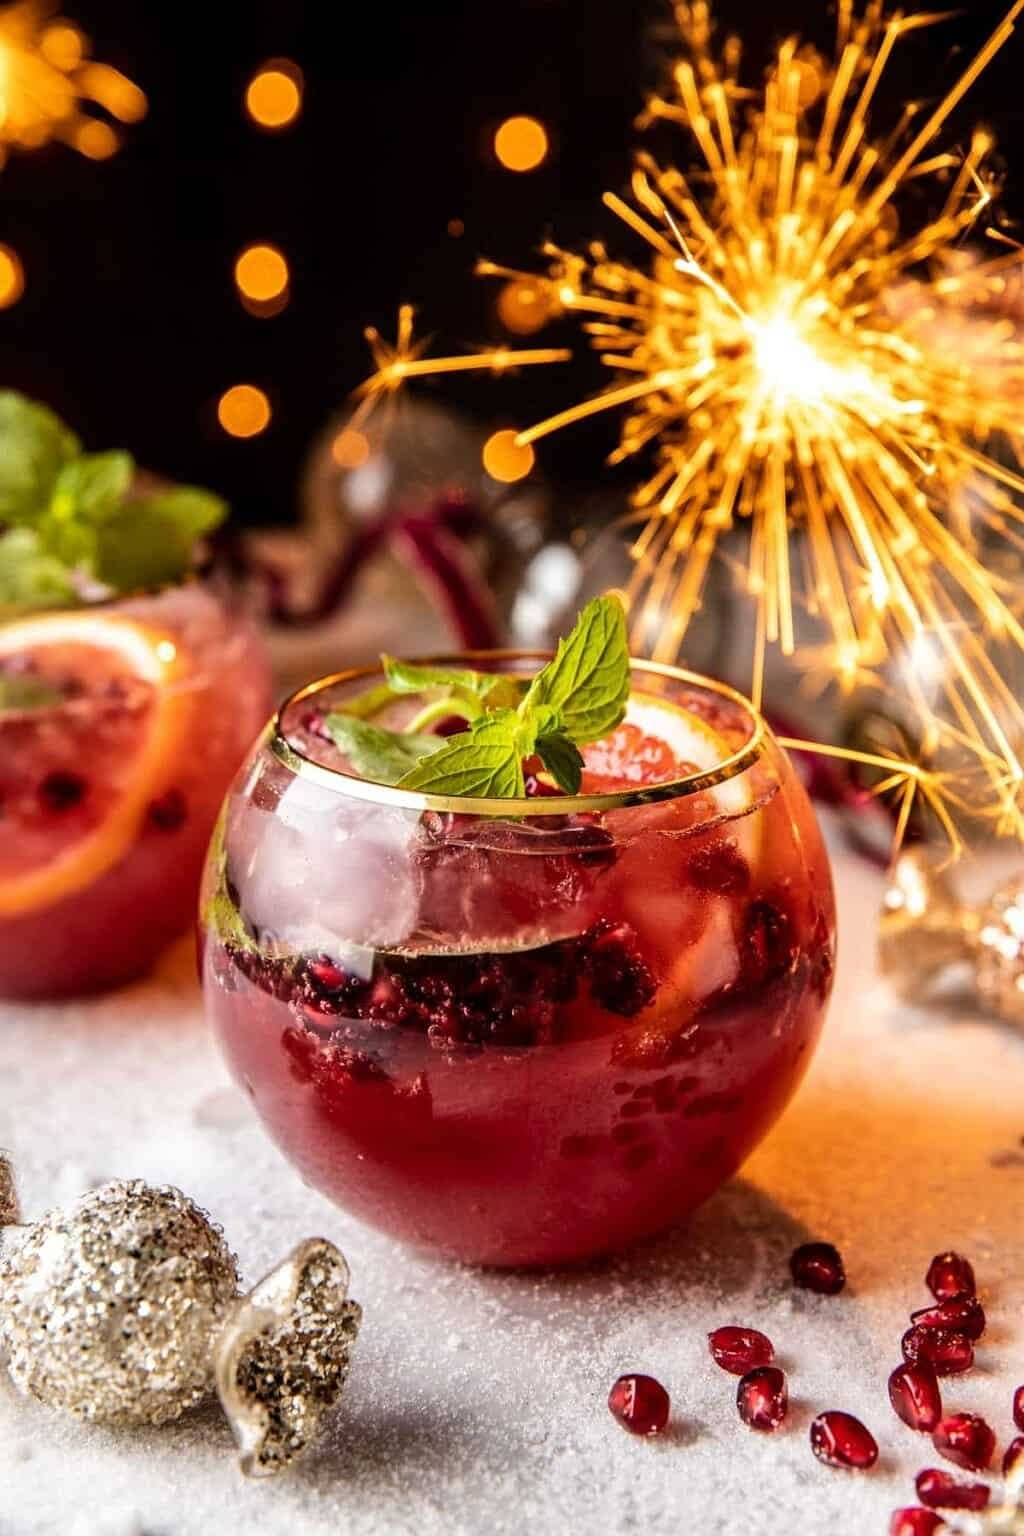 Pomegranate cocktail filled with ice, garnished with fresh pomegranate arils and slices.